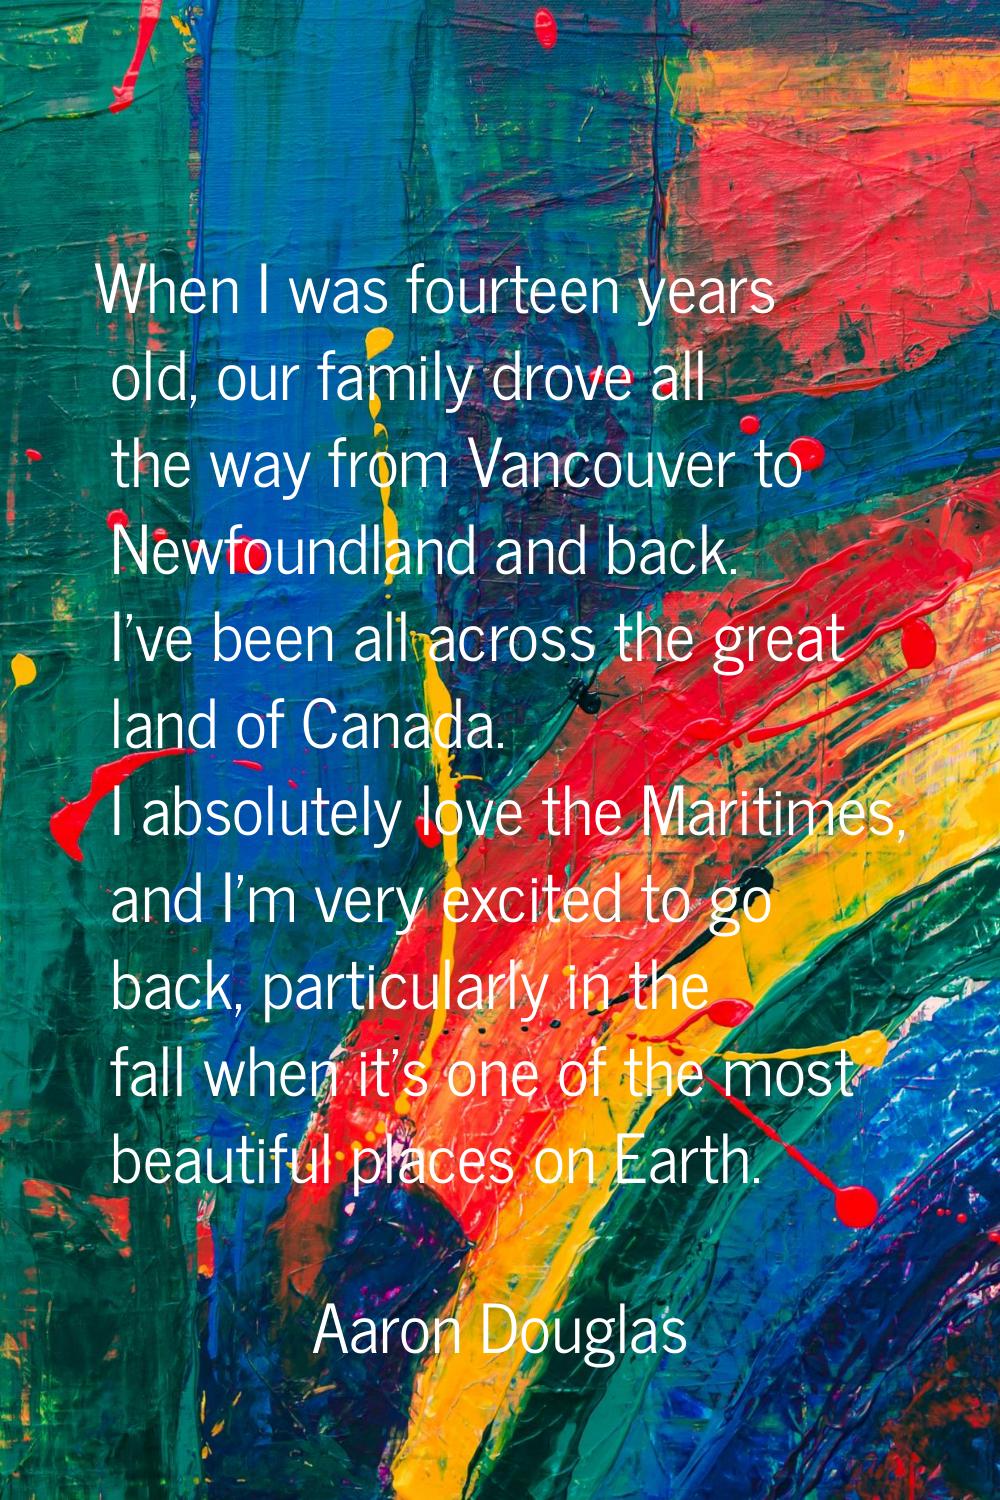 When I was fourteen years old, our family drove all the way from Vancouver to Newfoundland and back